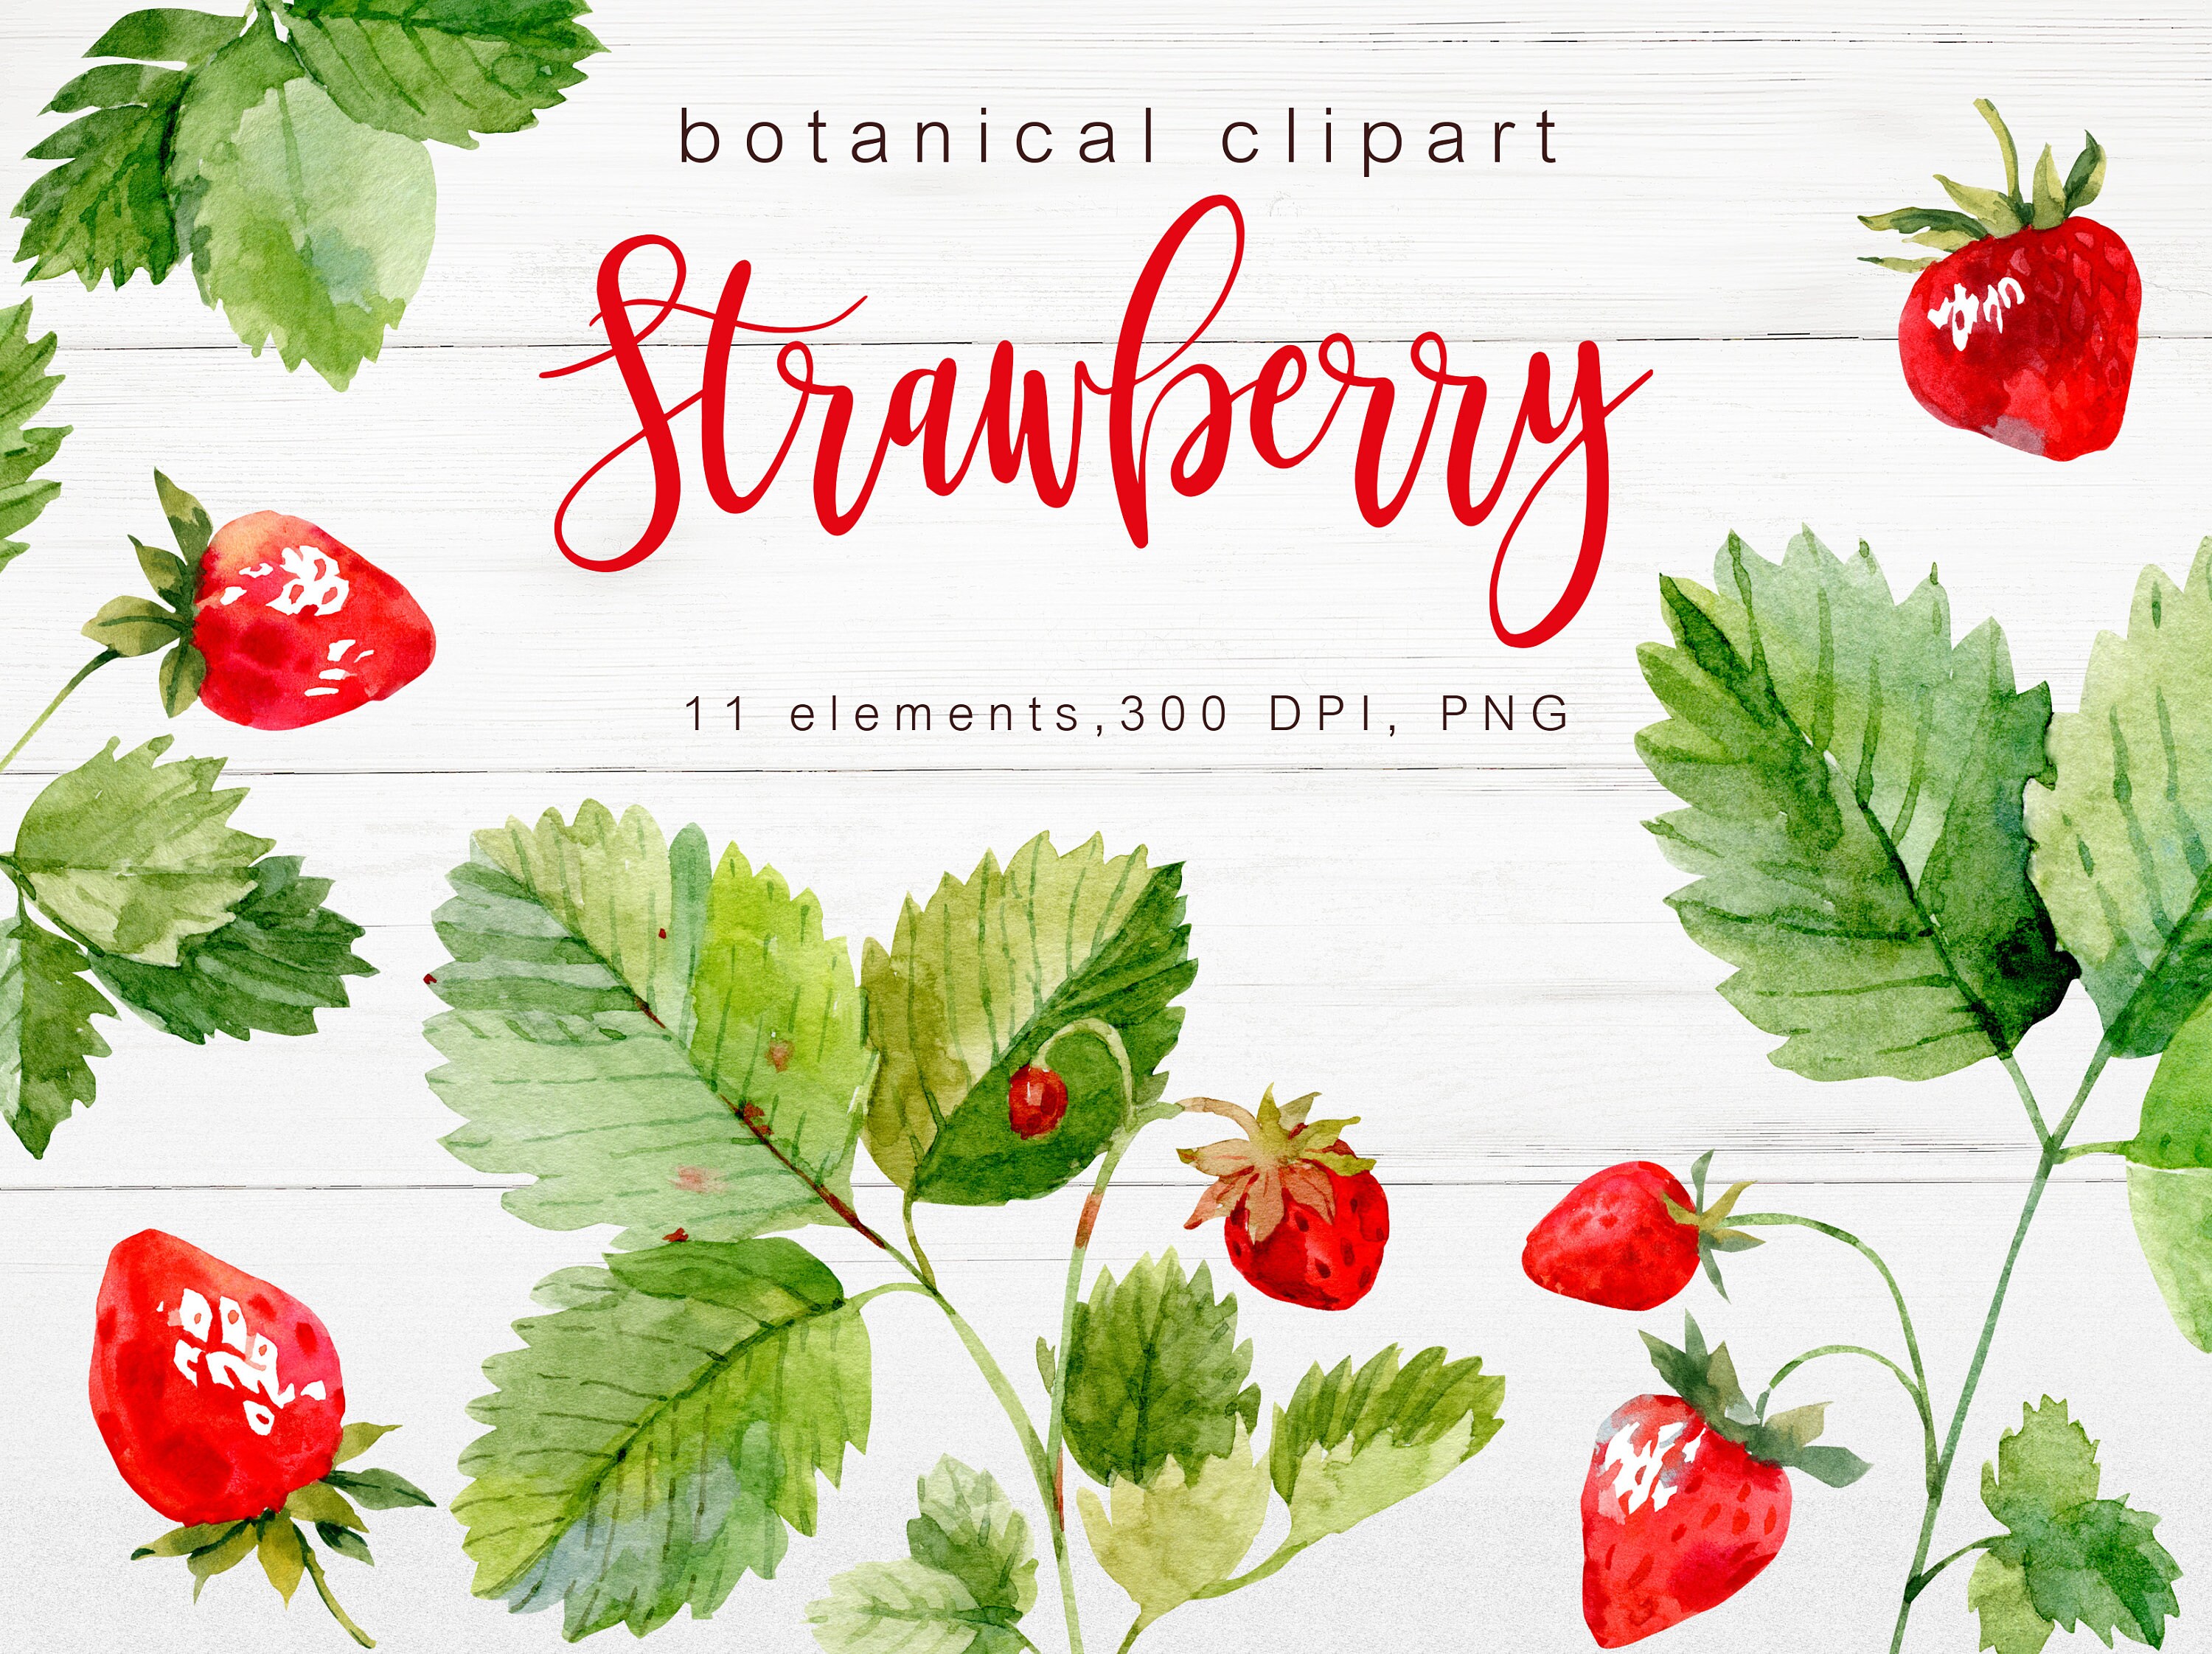 Page 2  Strawberry Wrapping Paper Images - Free Download on Freepik